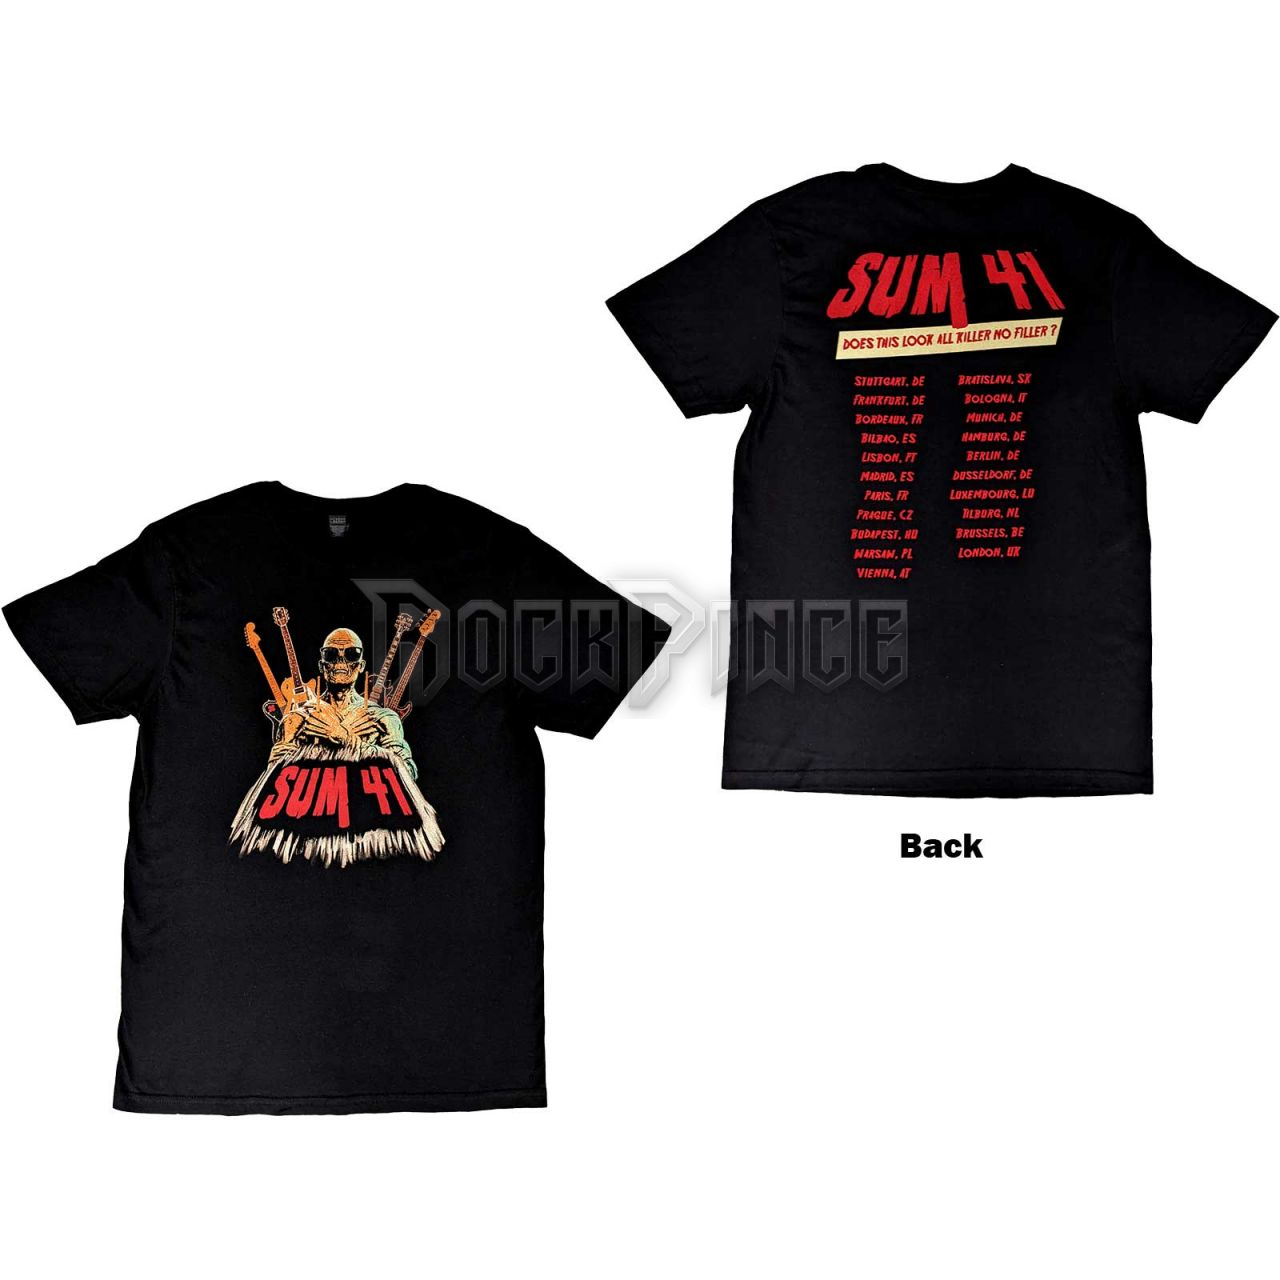 Sum 41 - Does This Look Like All Killer No Filler European Tour 2022 - unisex póló - SUMTS09MB